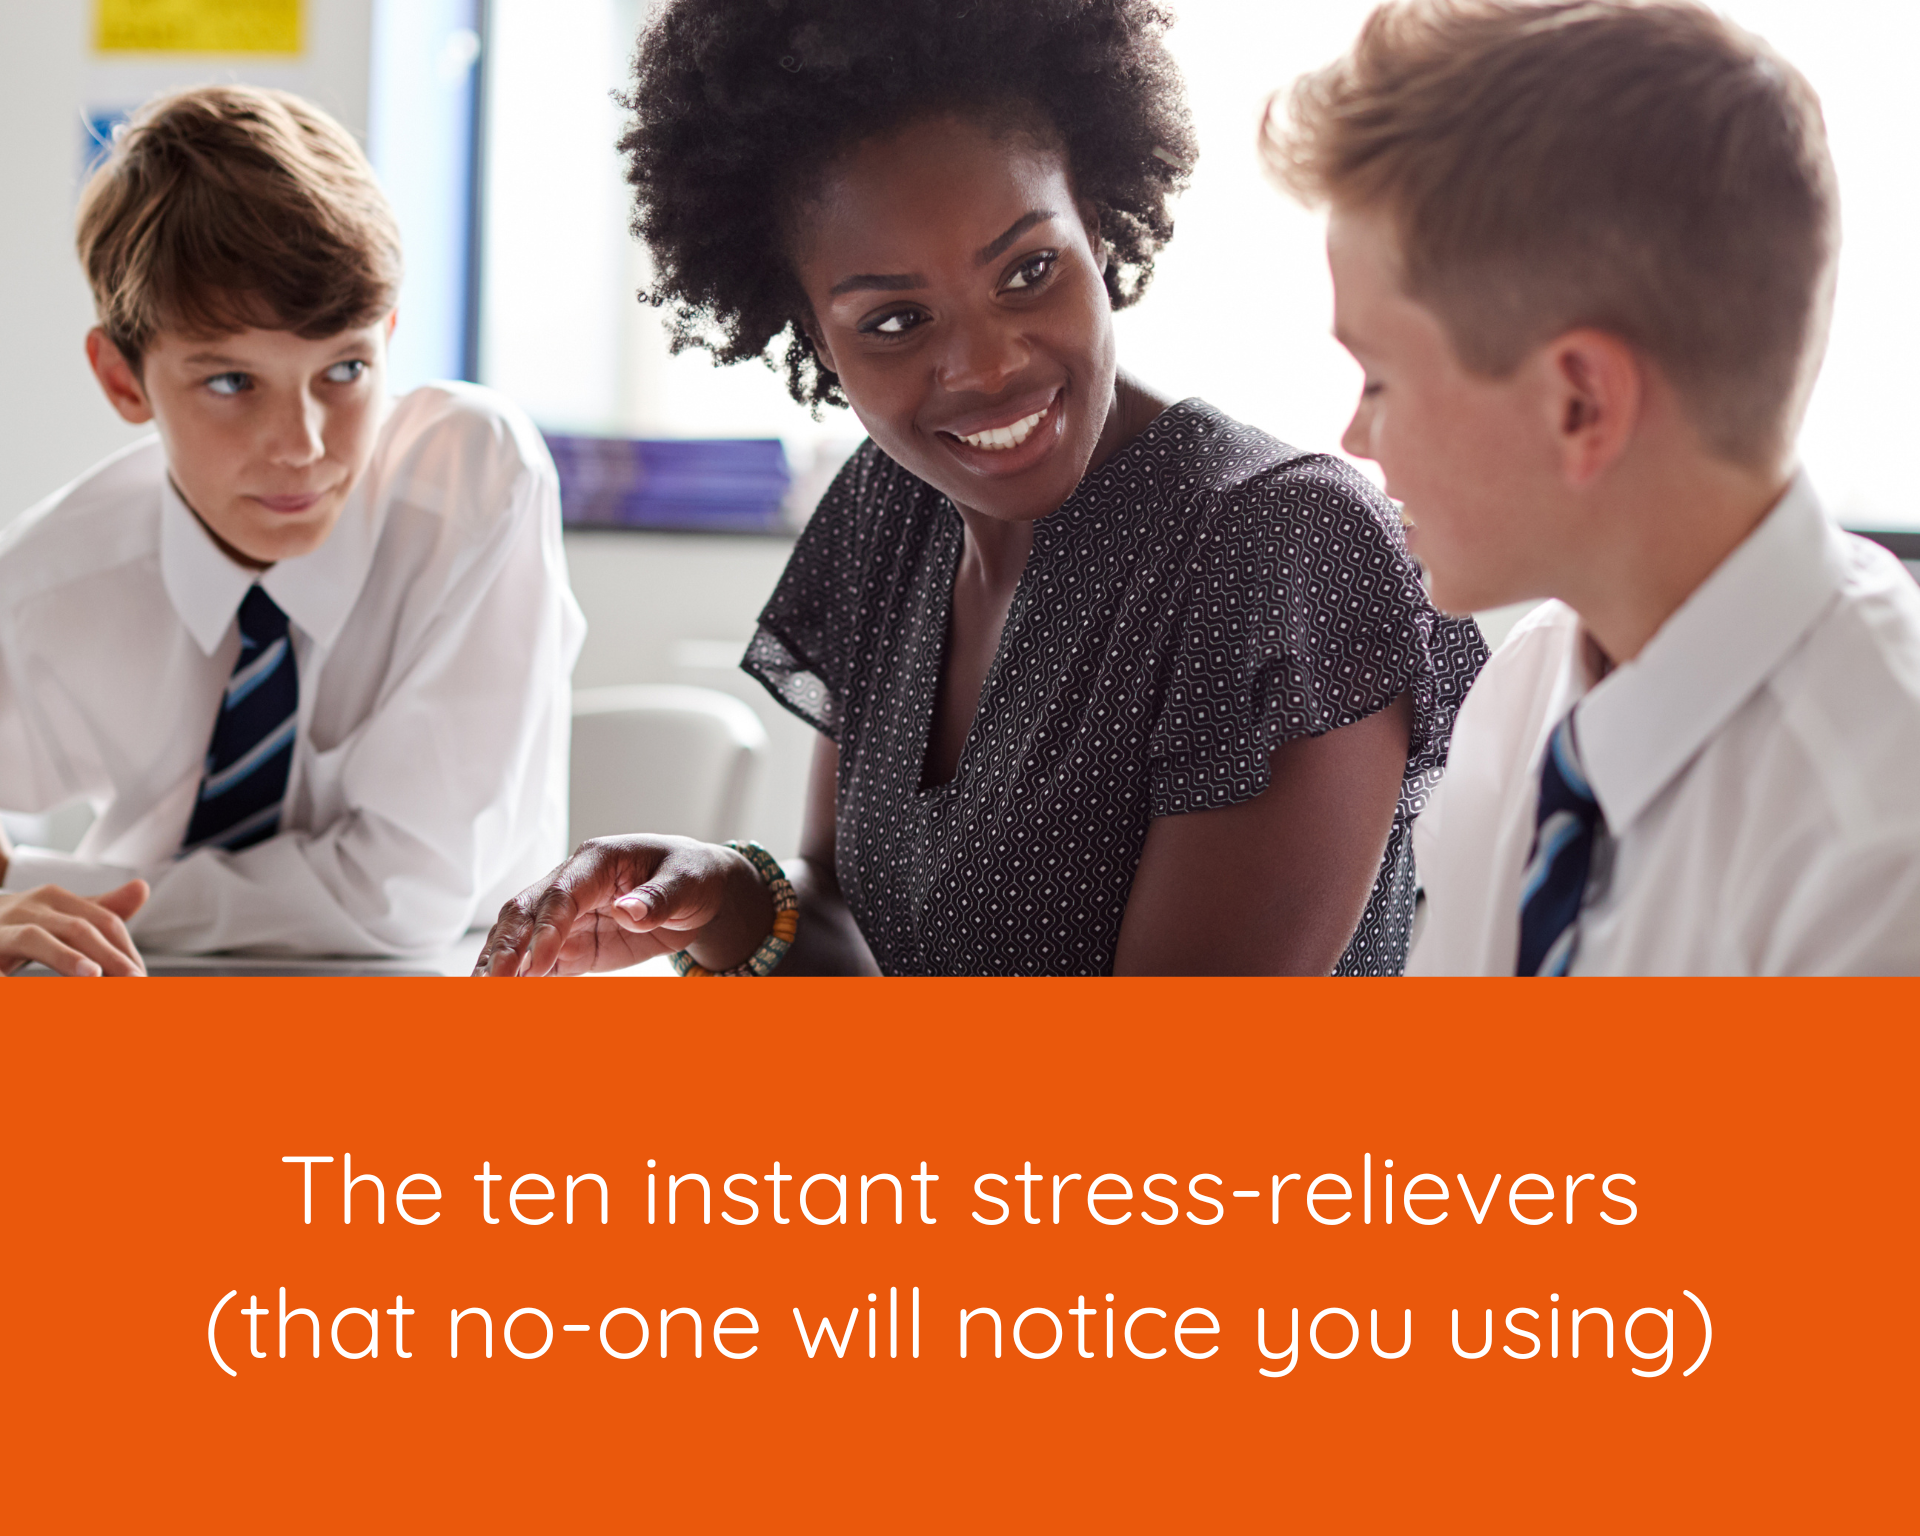 The ten instant stress-relievers: (that no one will notice you using)